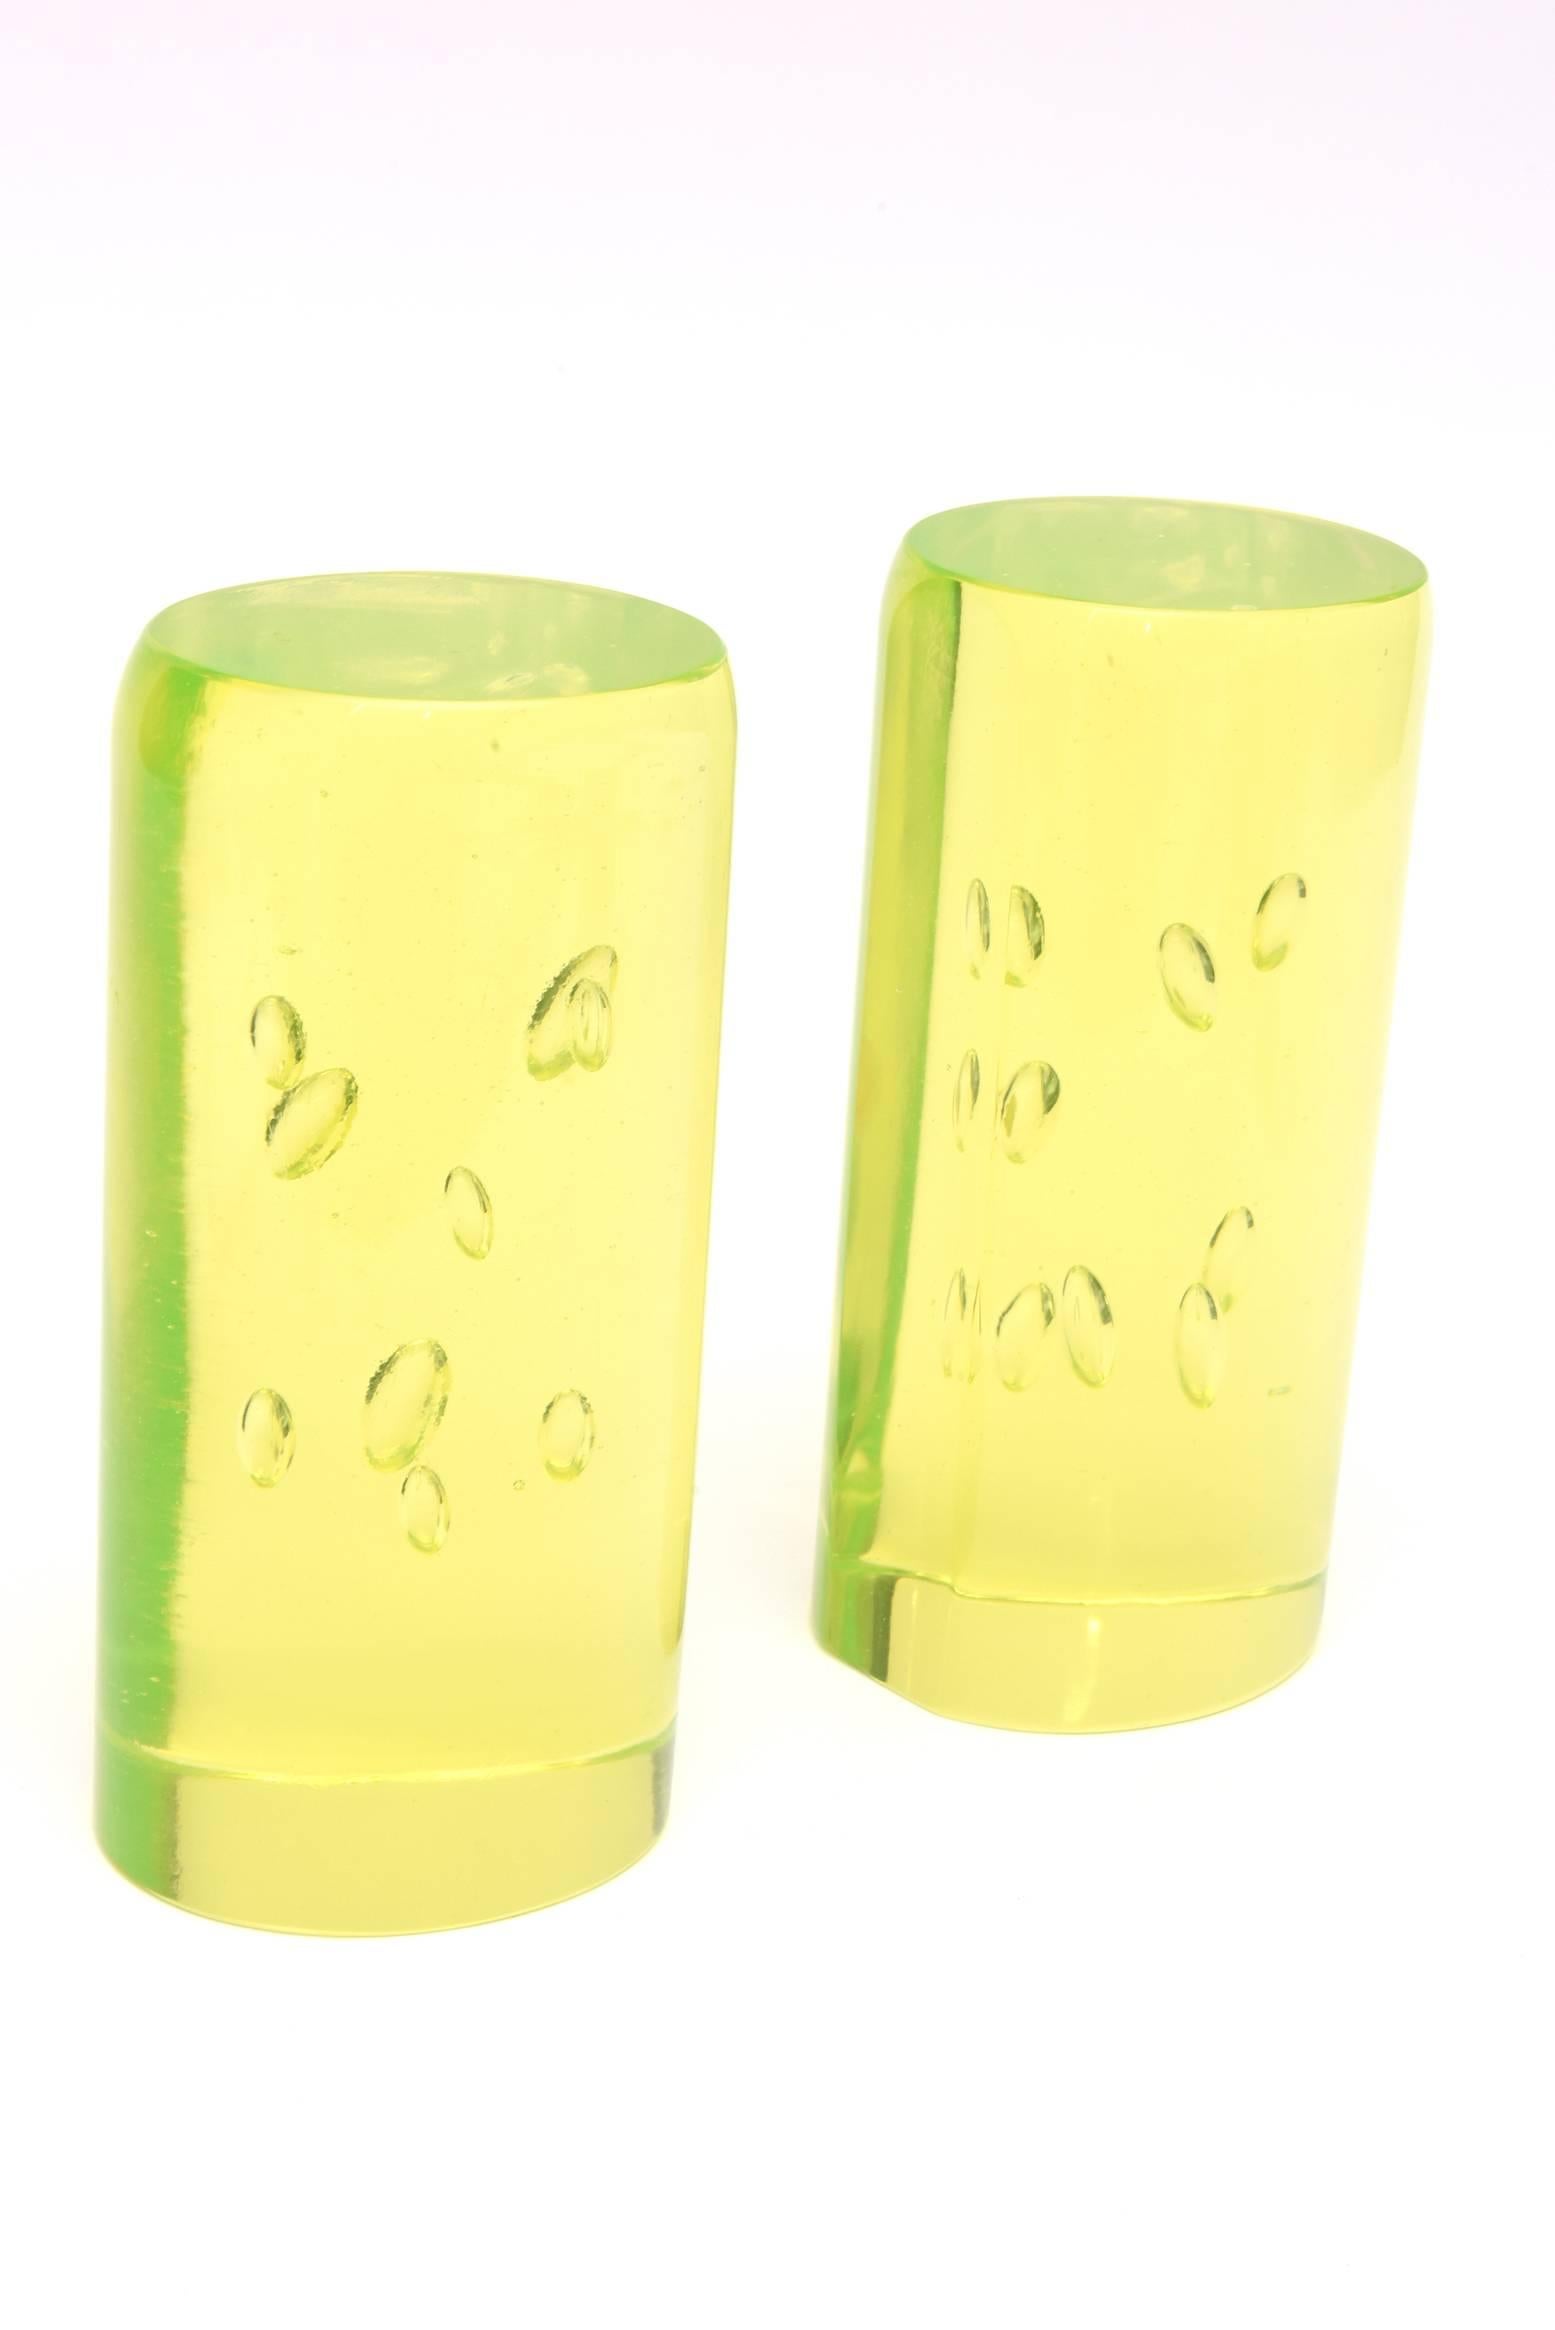 In these fabulous vintage Italian Murano bookends by Cenedese, the unusual and luscious vibrant color of chartreuse is brilliant. The large controlled bubbles seem to float in the space of glass and the original paper label on them is still intact.